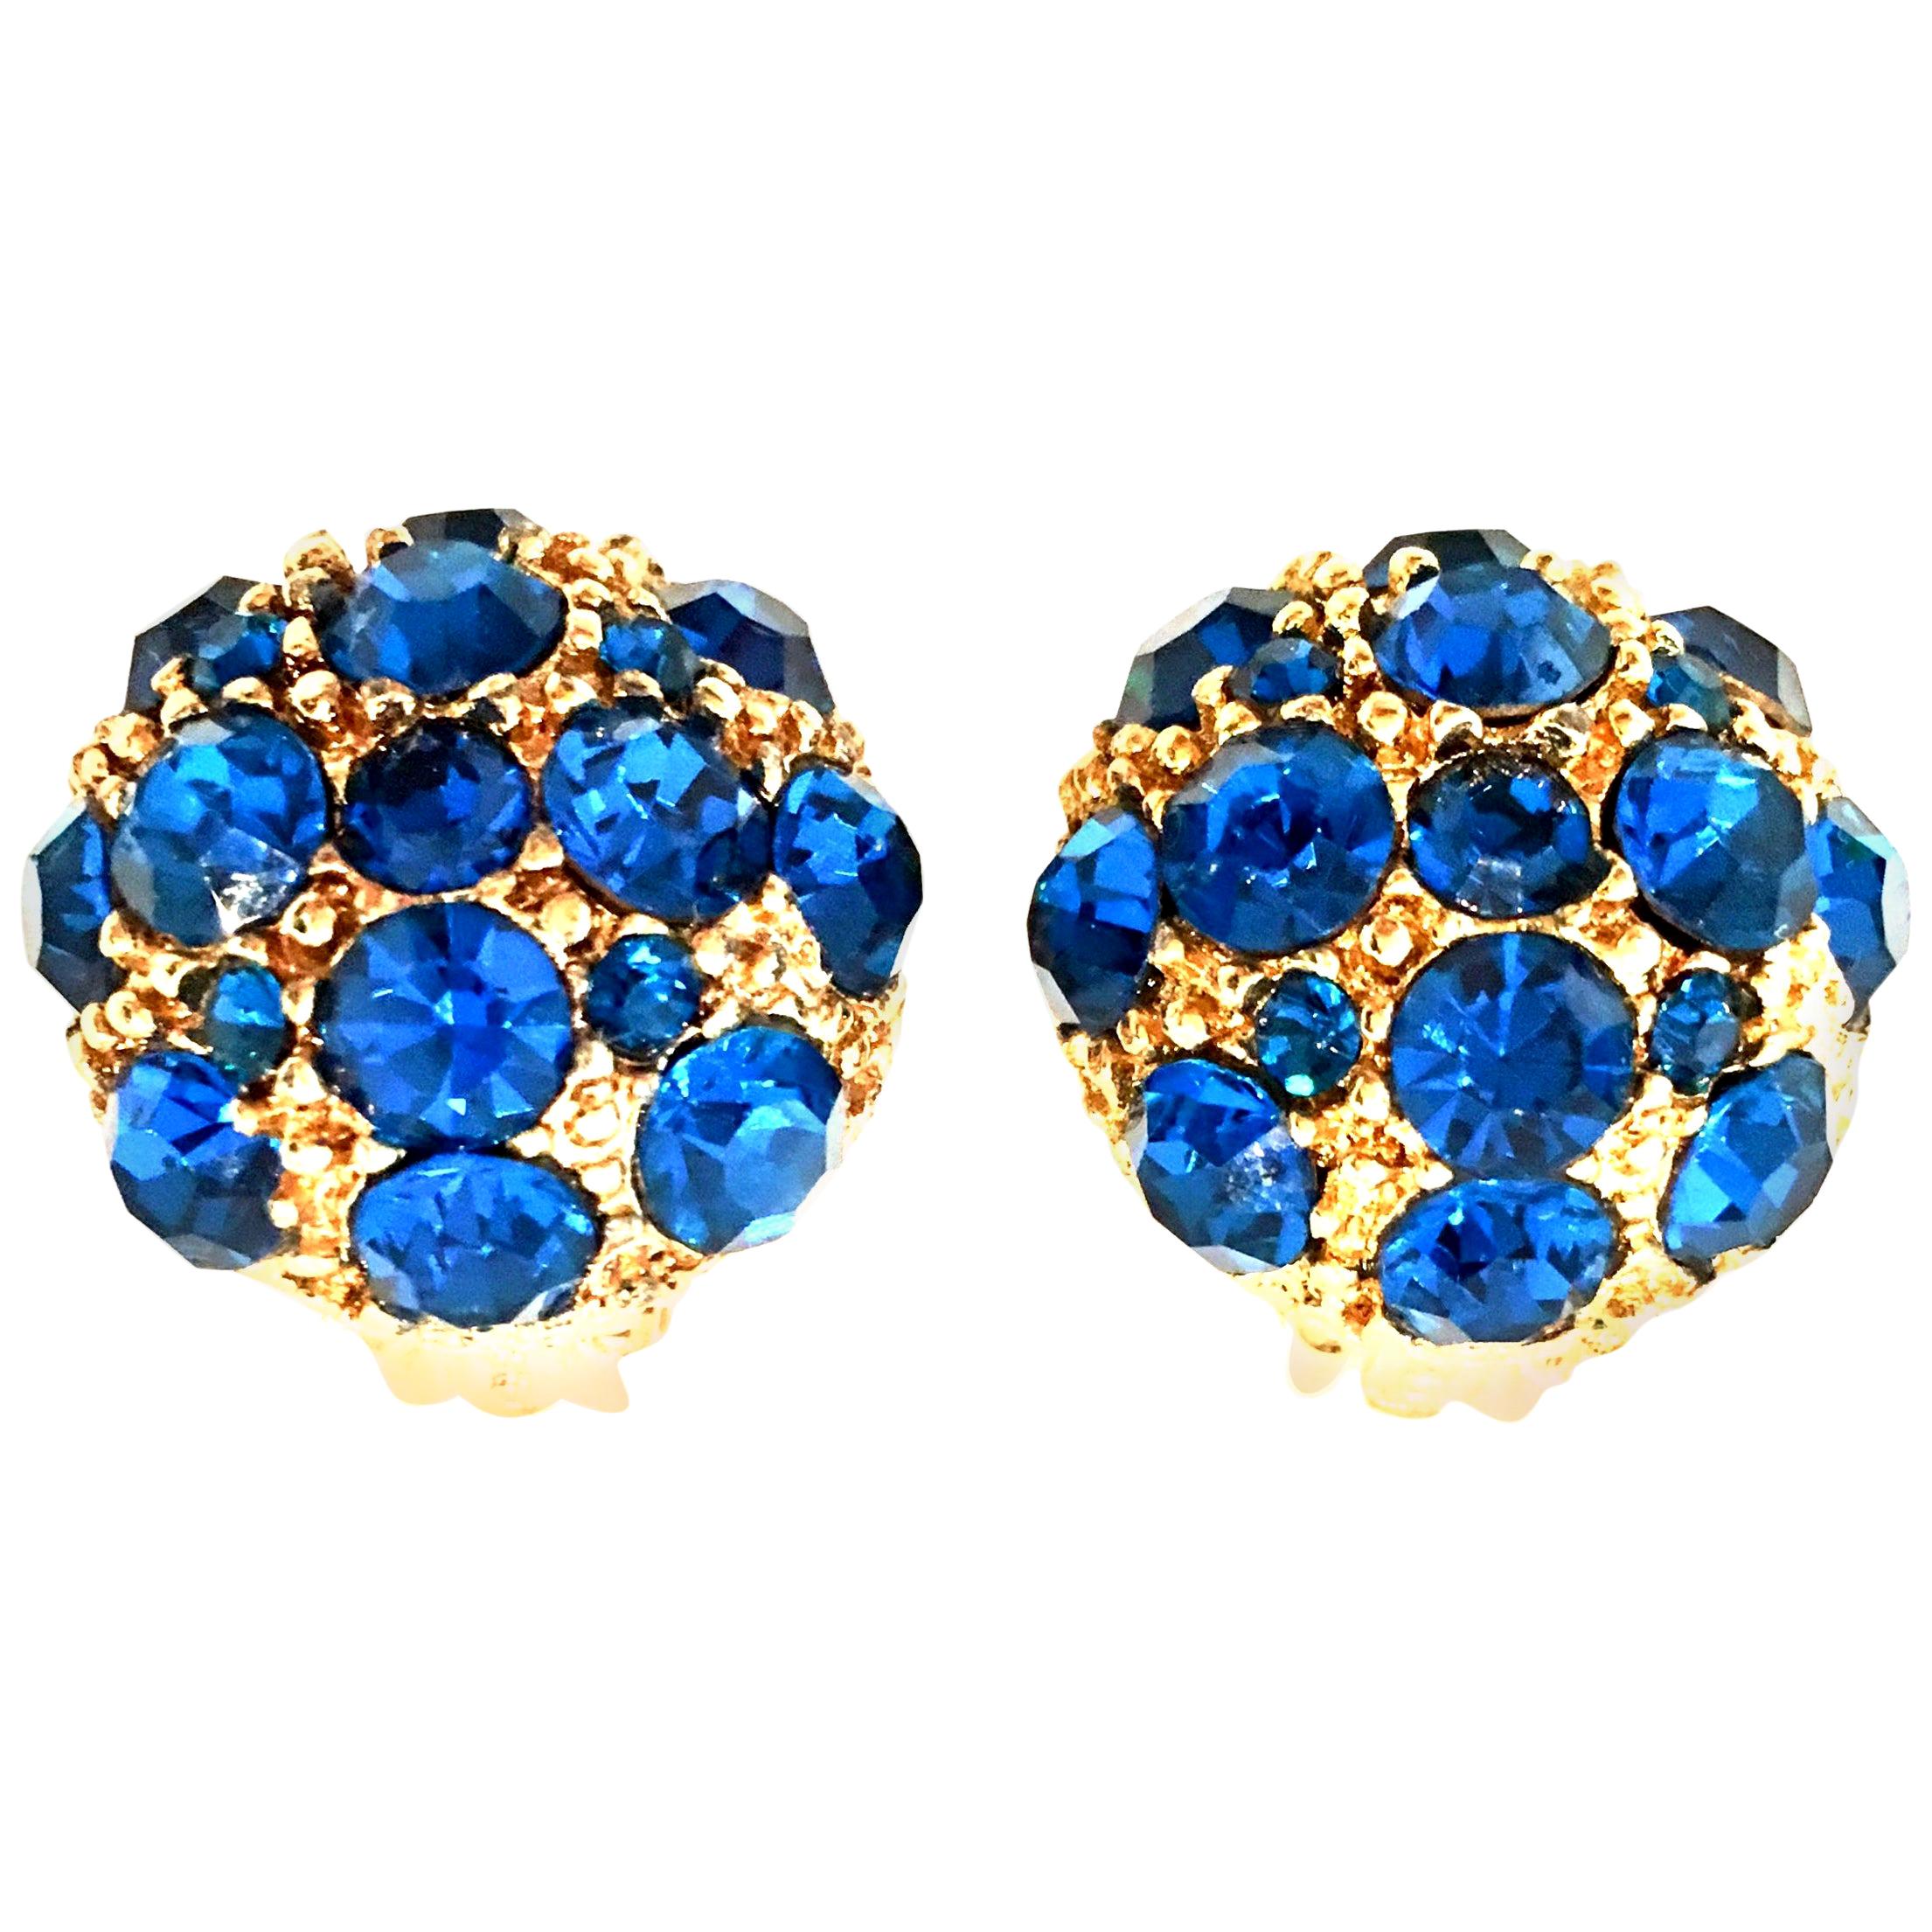 20th Century Gold Plate & Sapphire Blue Swarovski Crystal Rhinestone Dimensional Dome Clip Style Earrings. Features gold plate textured and beaded ground with brilliant paste set round sapphire blue Swarovski crystals.